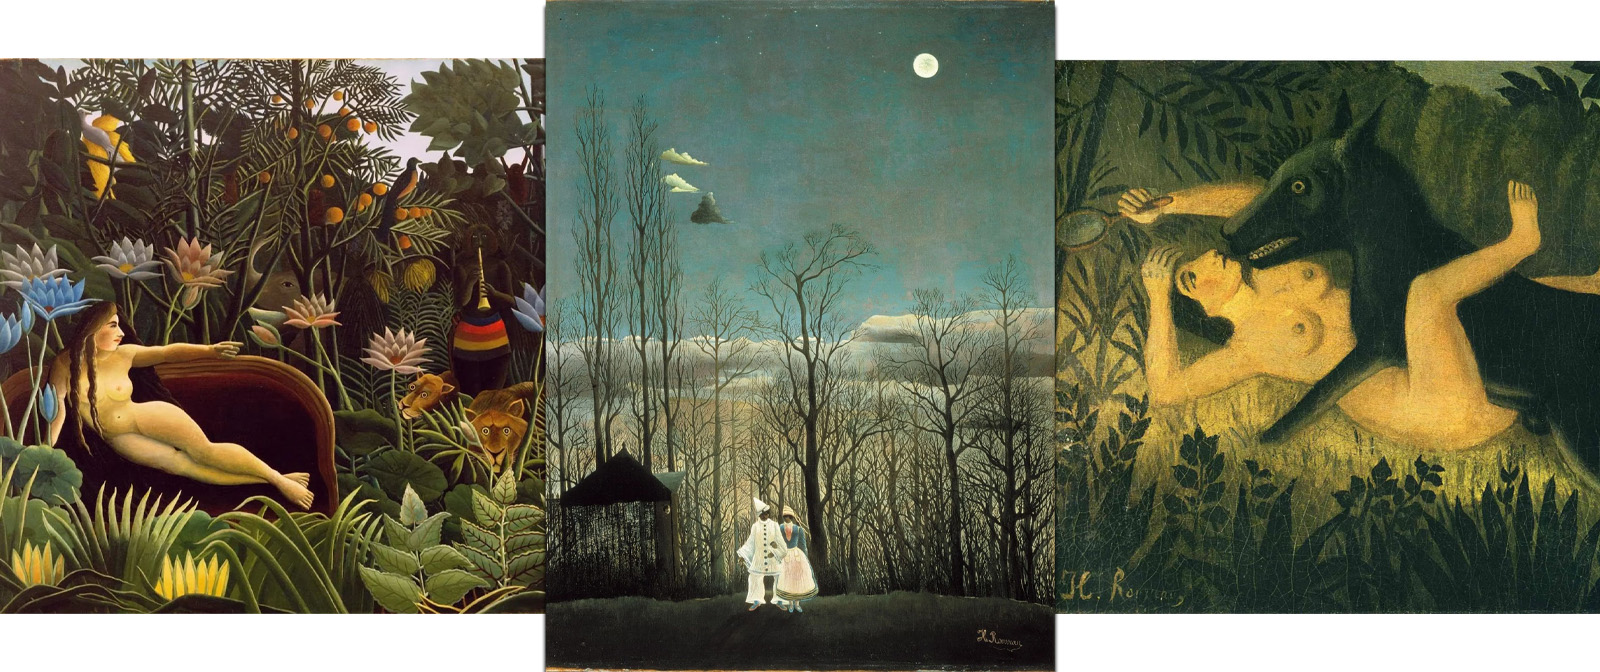 A naive weirdo who was laughed at by the whole society and whose paintings were ahead of their time. Primitivist Henri Rousseau